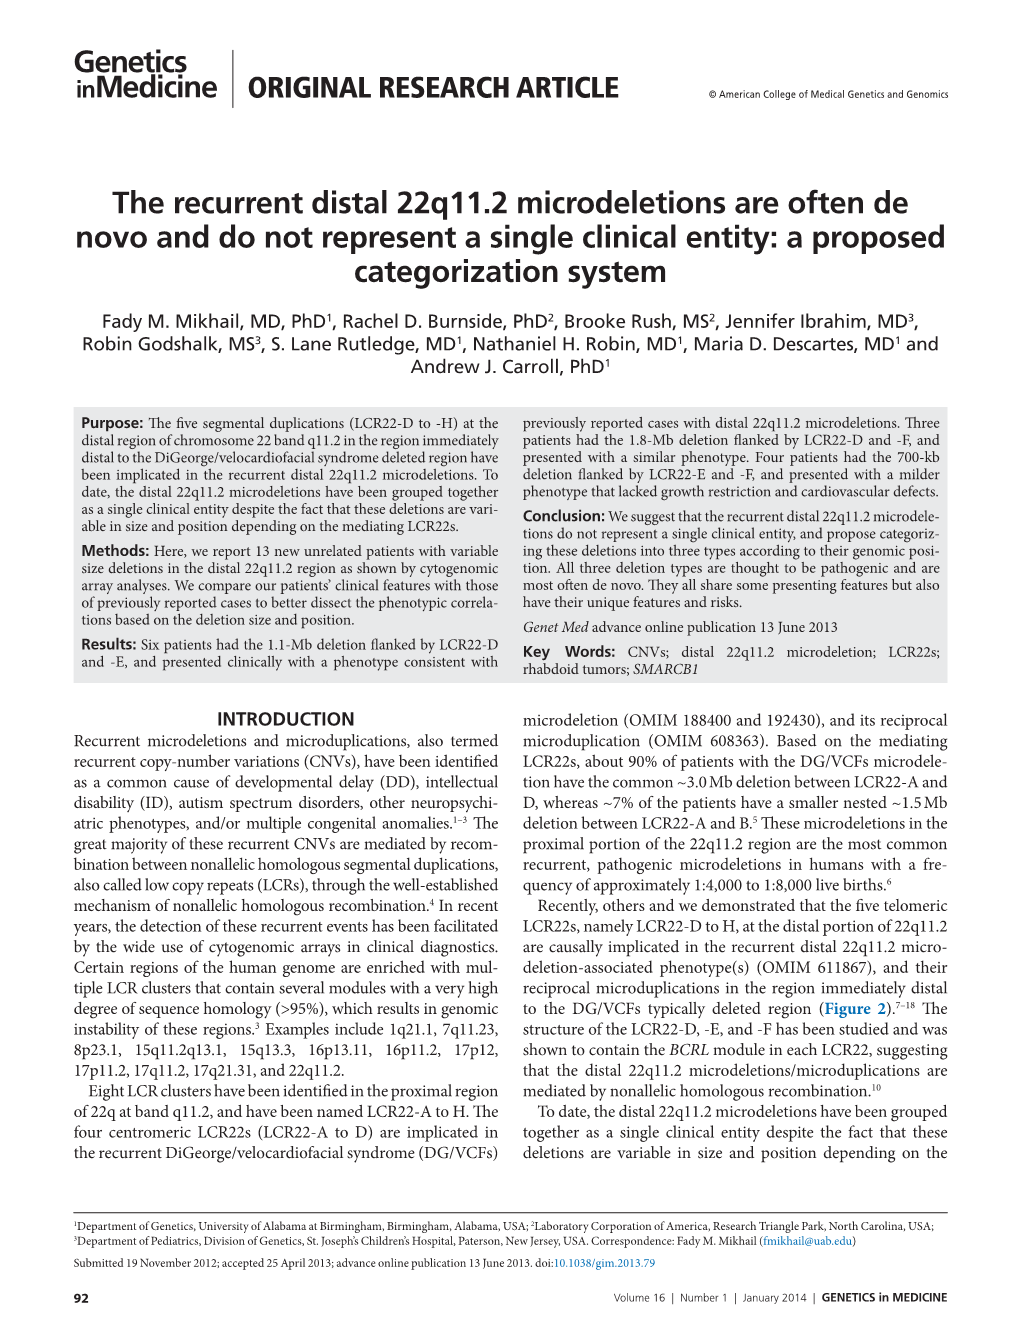 The Recurrent Distal 22Q11.2 Microdeletions Are Often De Novo and Do Not Represent a Single Clinical Entity: a Proposed Categorization System